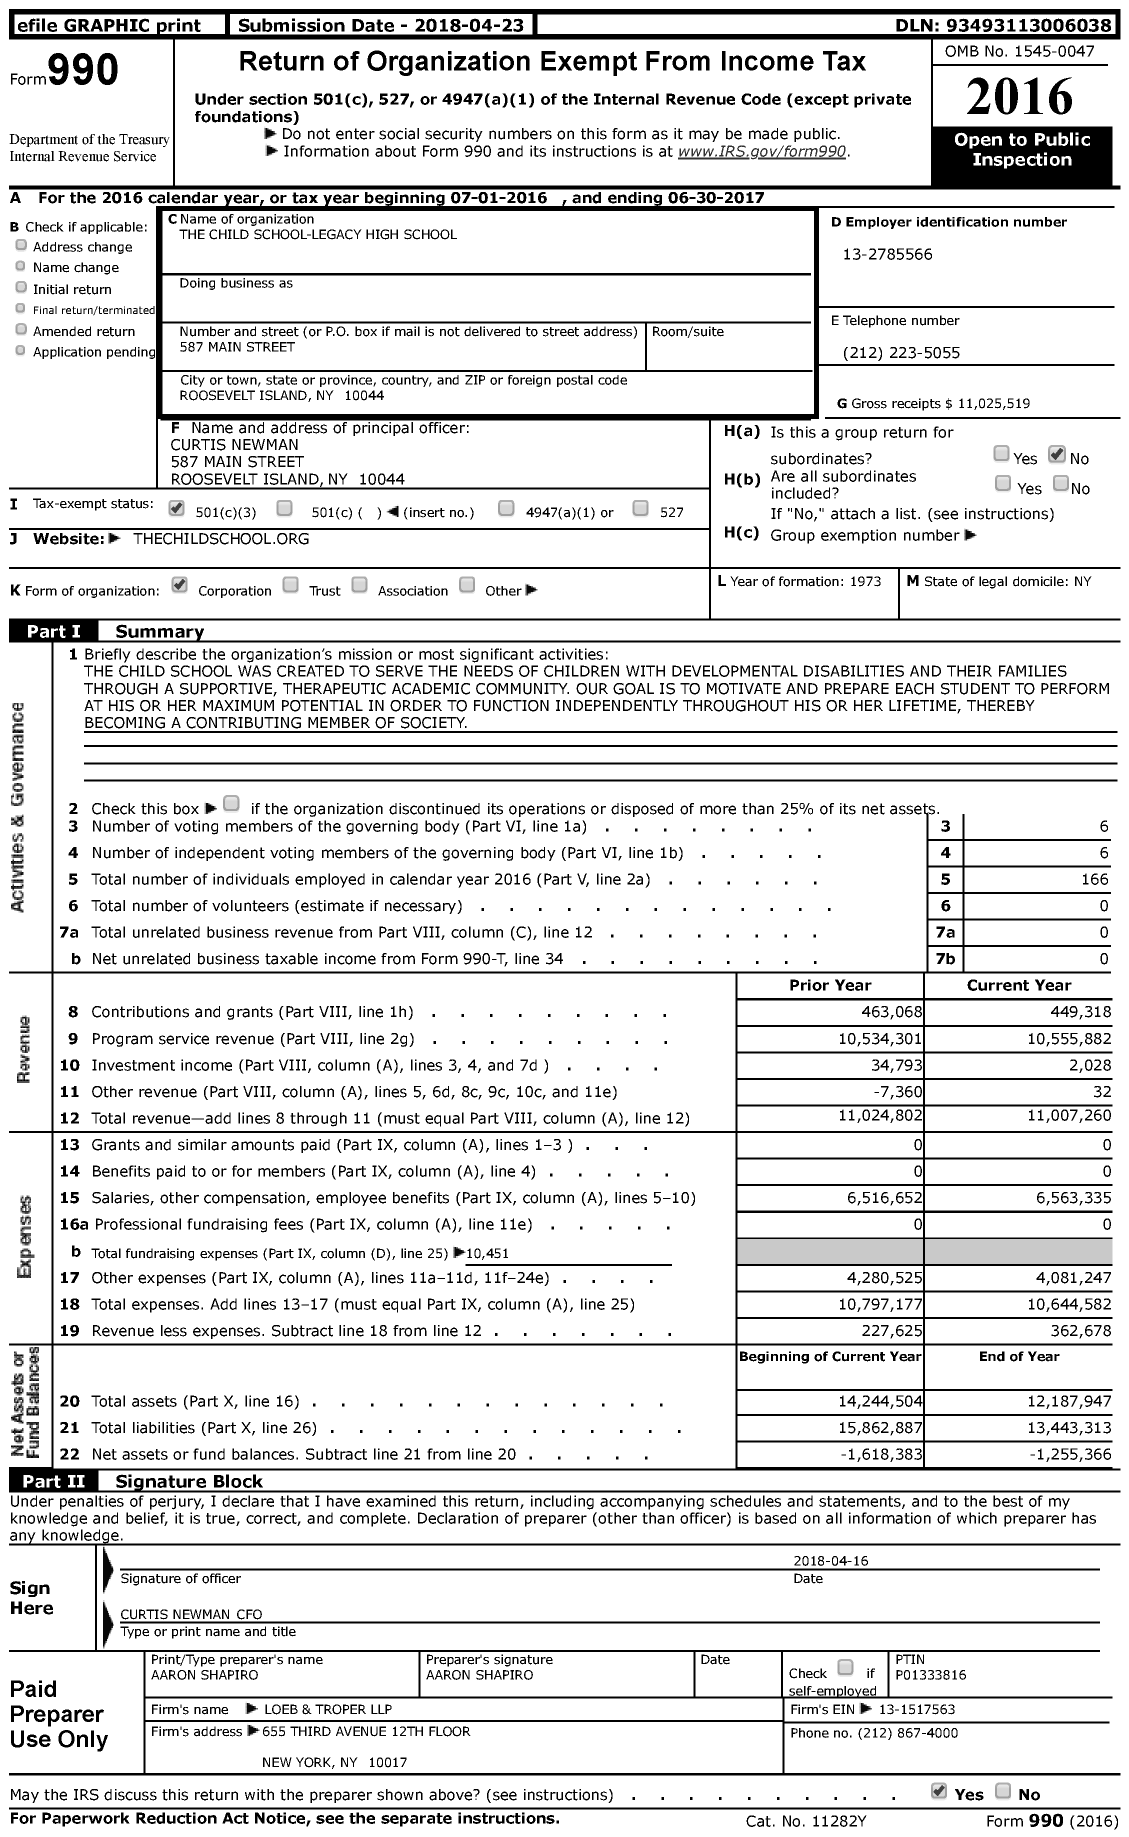 Image of first page of 2016 Form 990 for Child School / Legacy High School